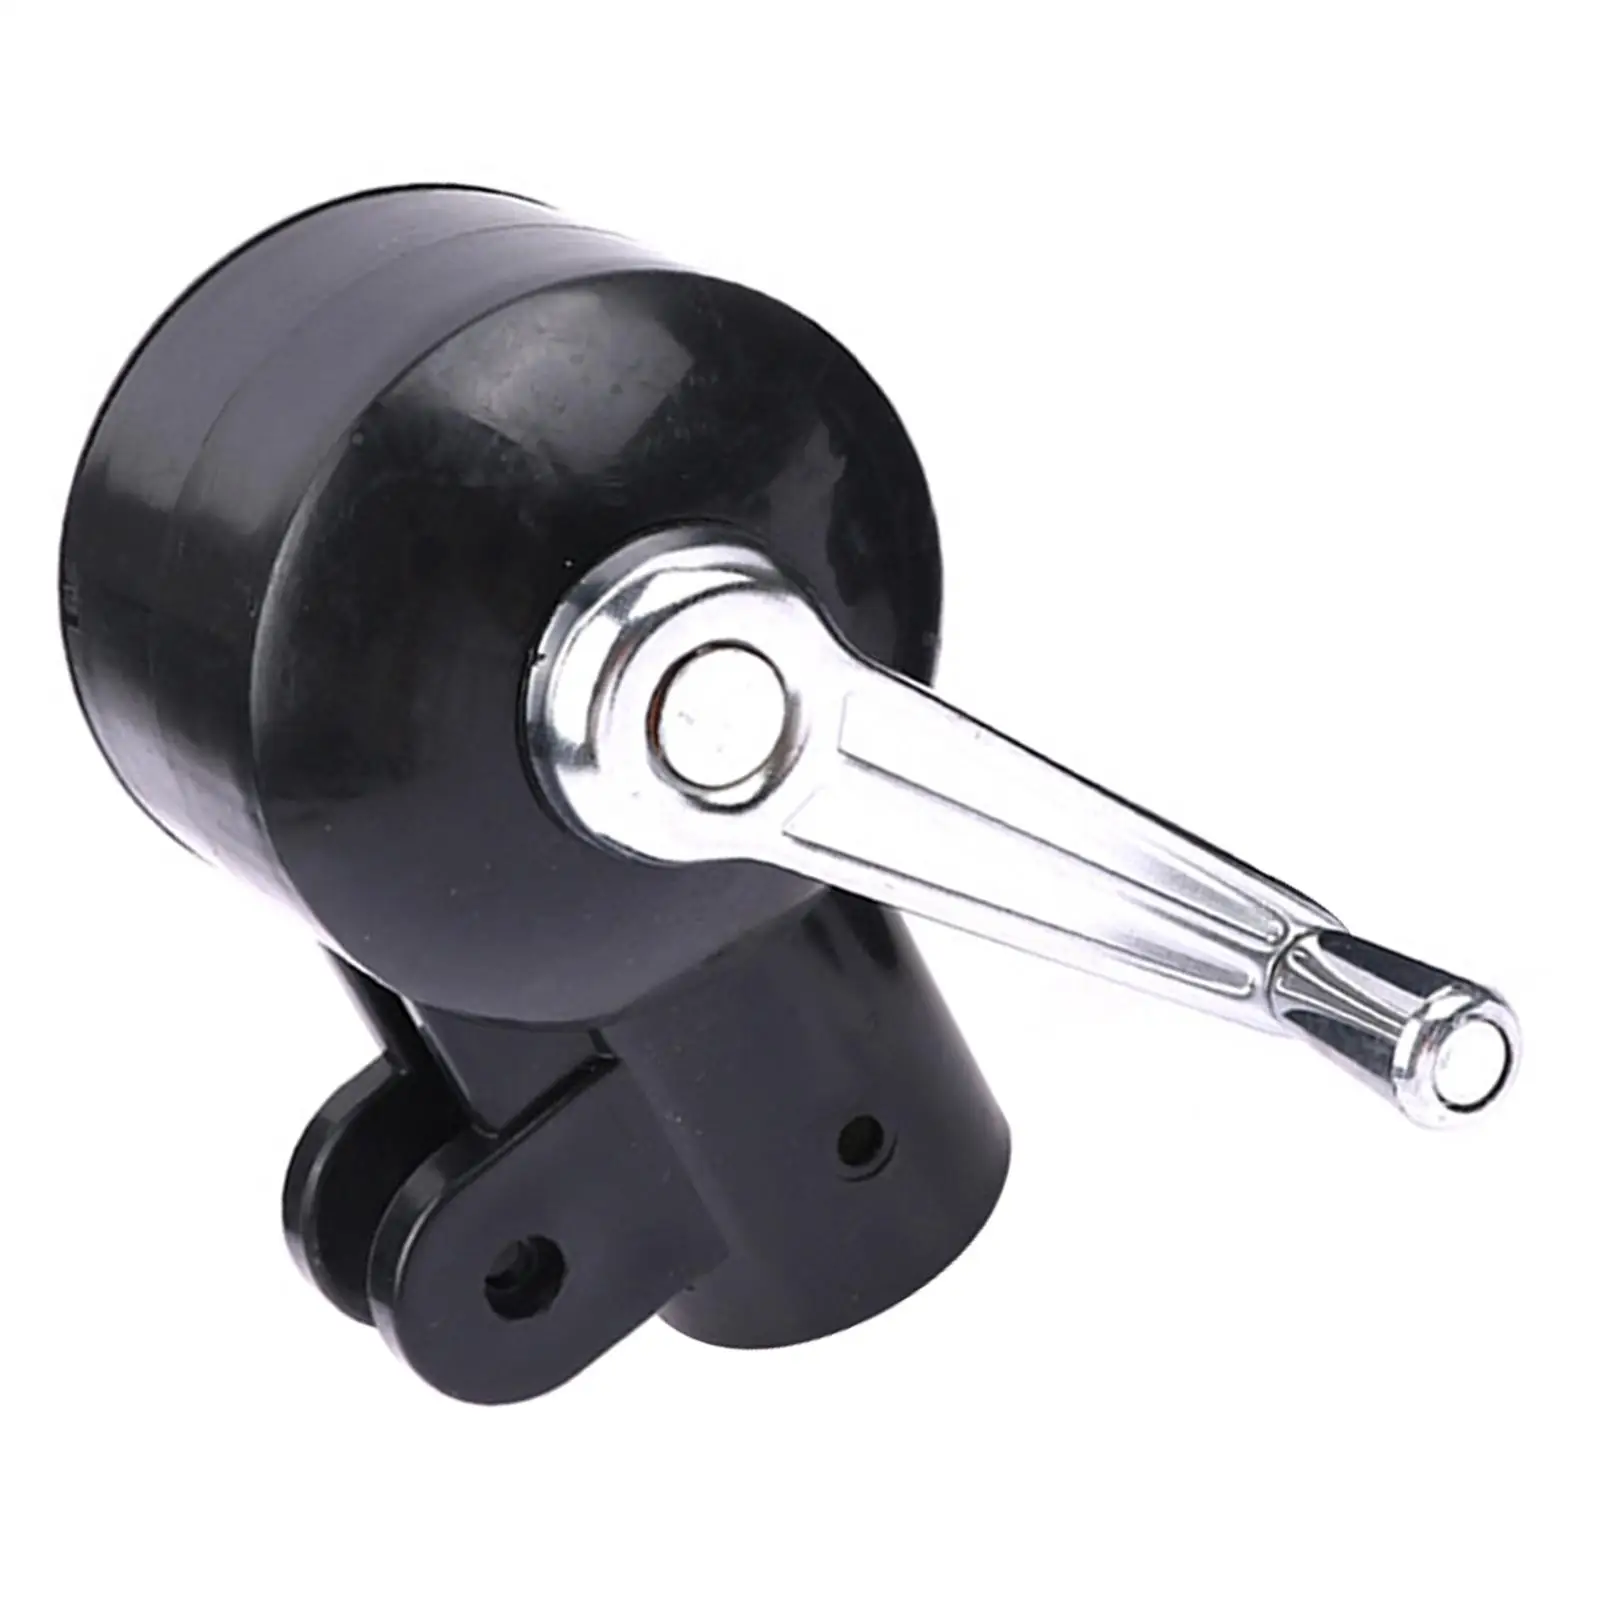 Patio Umbrella Accessories Crank Handle Assembly Dia. 42mm Crank-lift Replace for Patio Table Beach Picnic Courtyard Outdoor